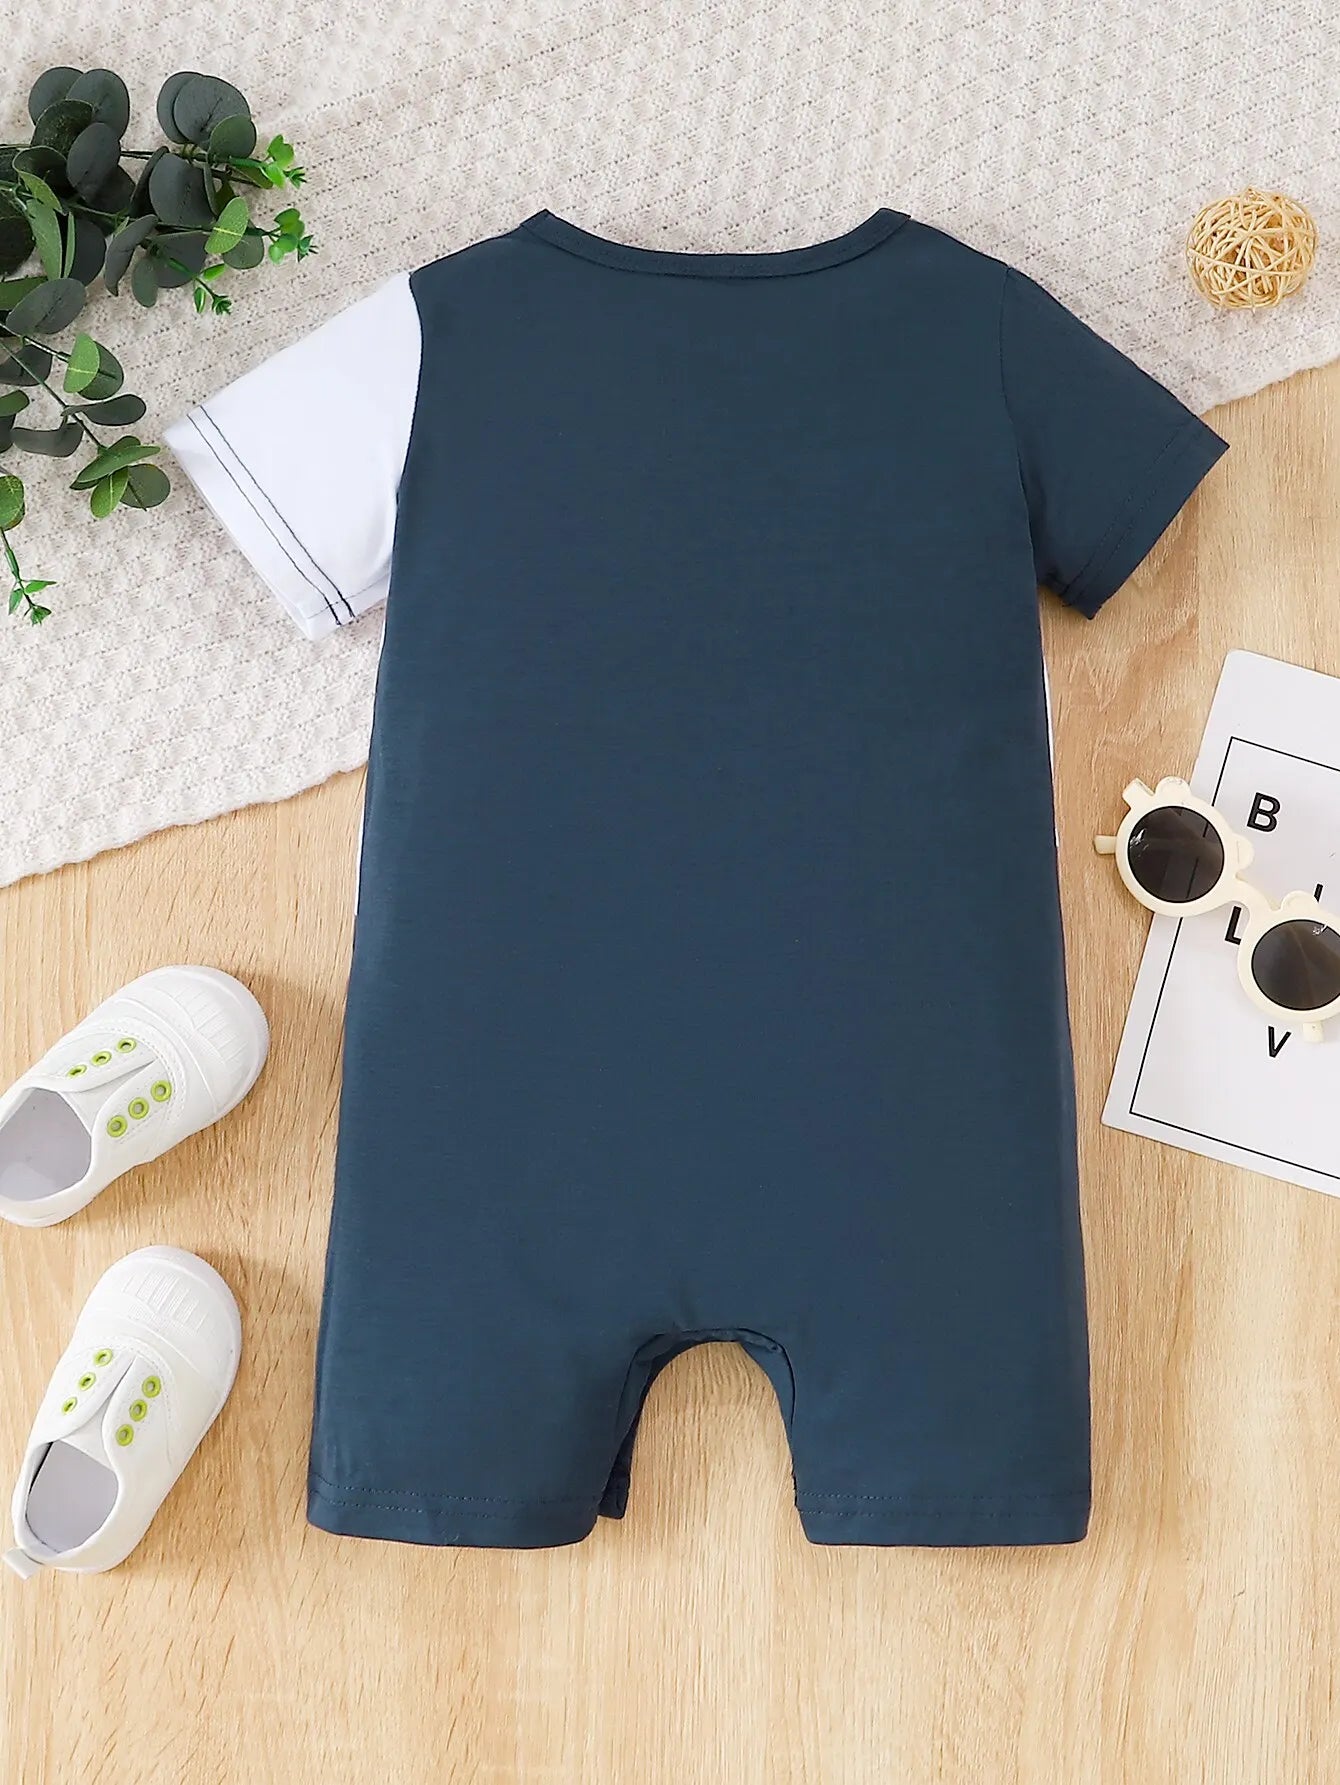 Summer Short Sleeves Cool and Comfortable Holiday Jumpsuit, Suitable for Boys 1-2 Years Old Jumpsuit Shorts, Baby Color Patchwor